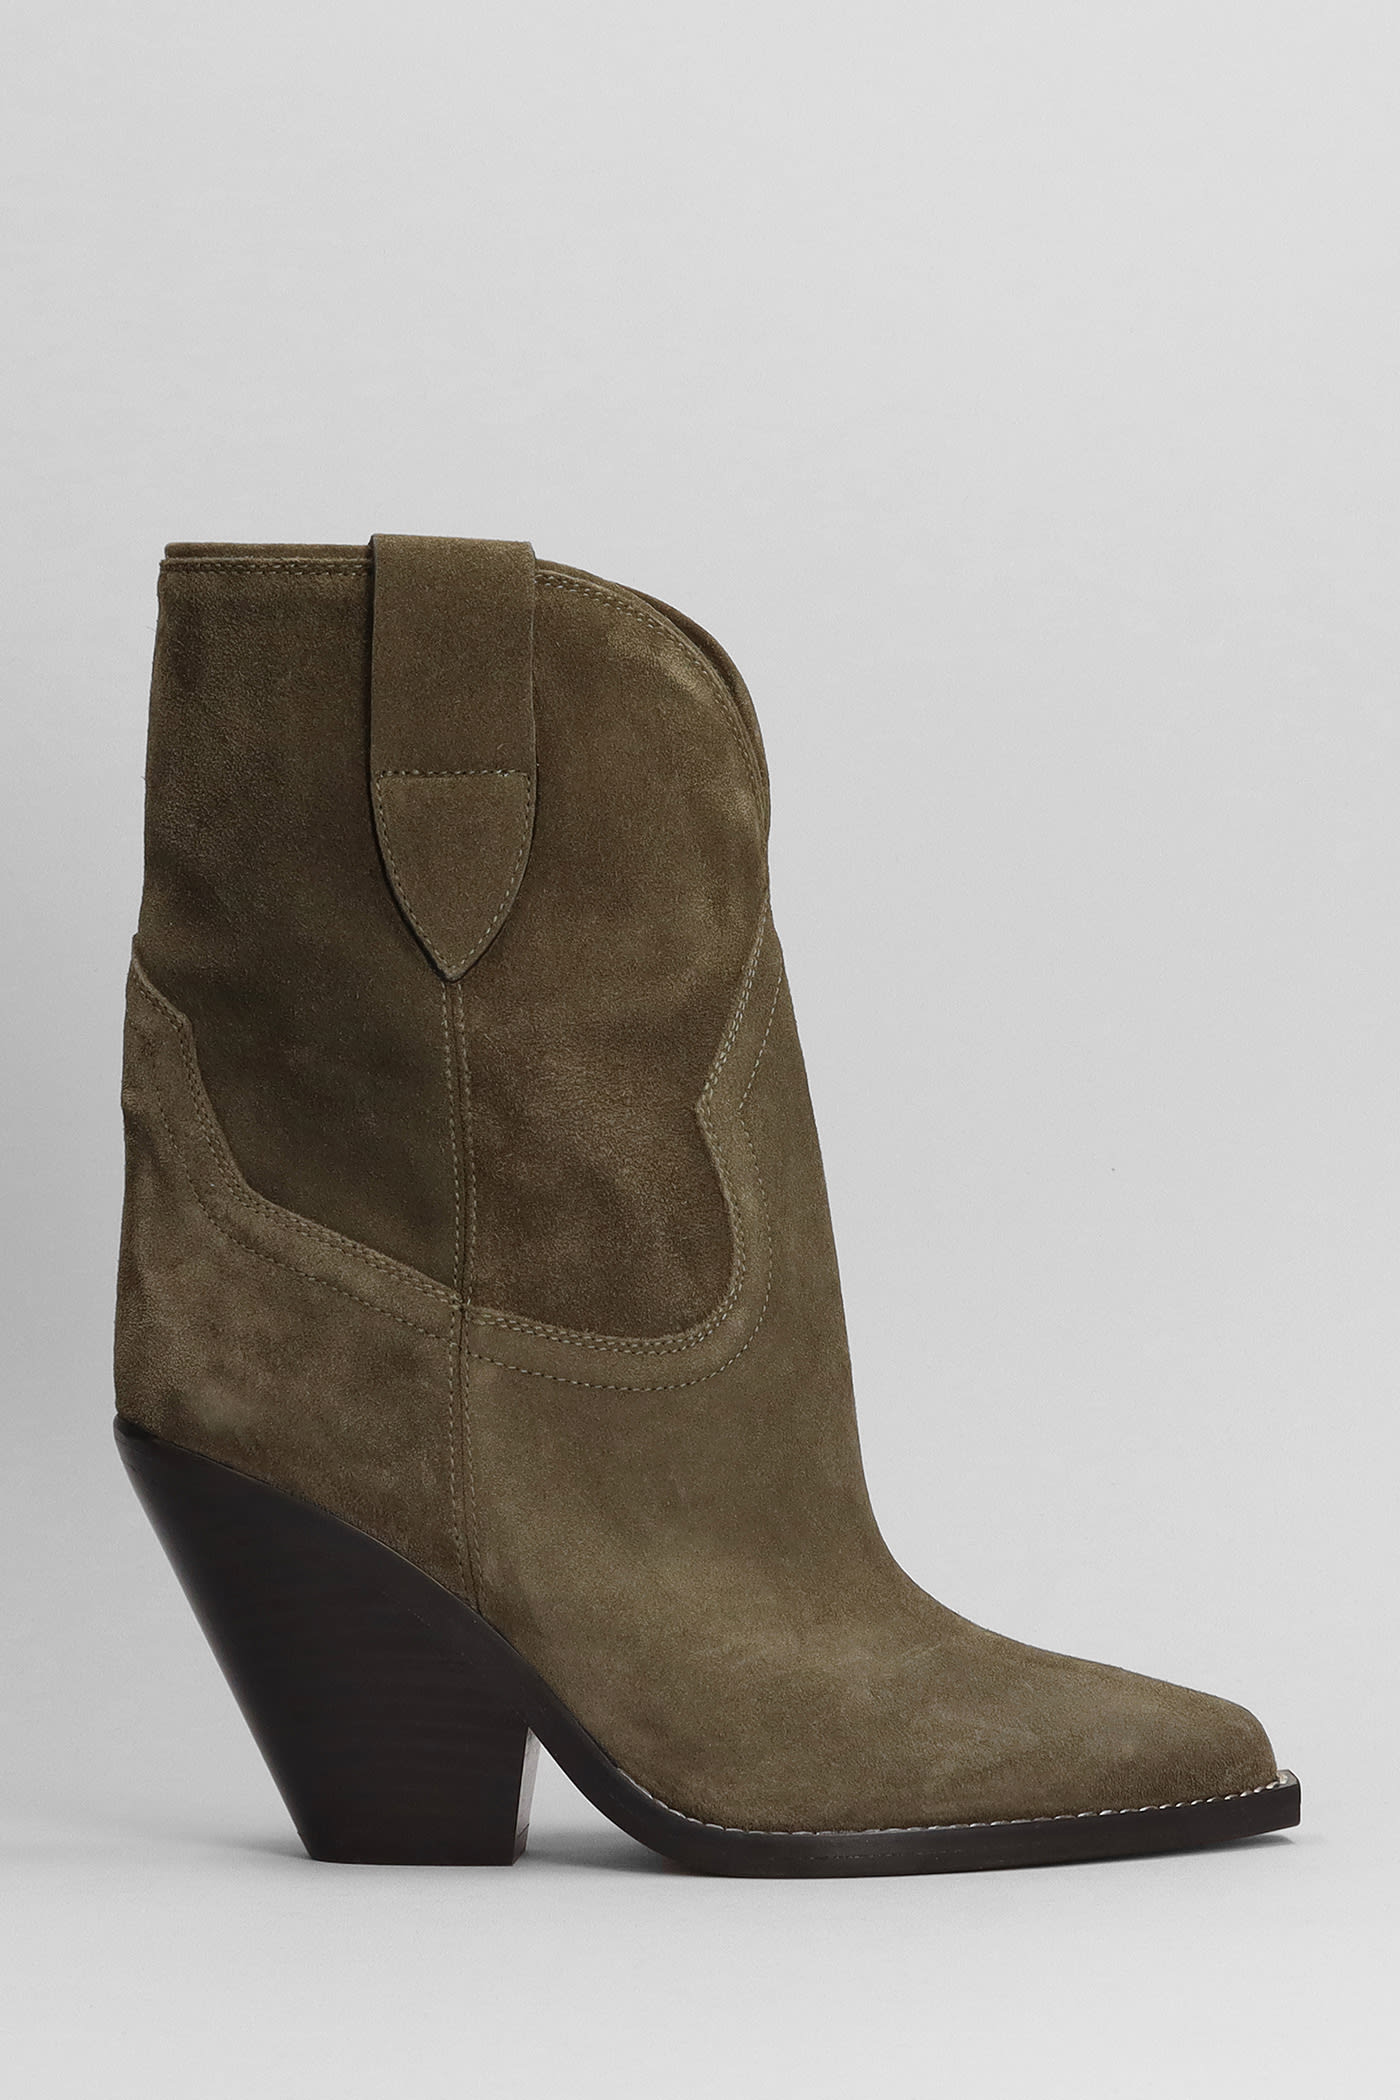 ISABEL MARANT LEYANE TEXAN ANKLE BOOTS IN KHAKI SUEDE